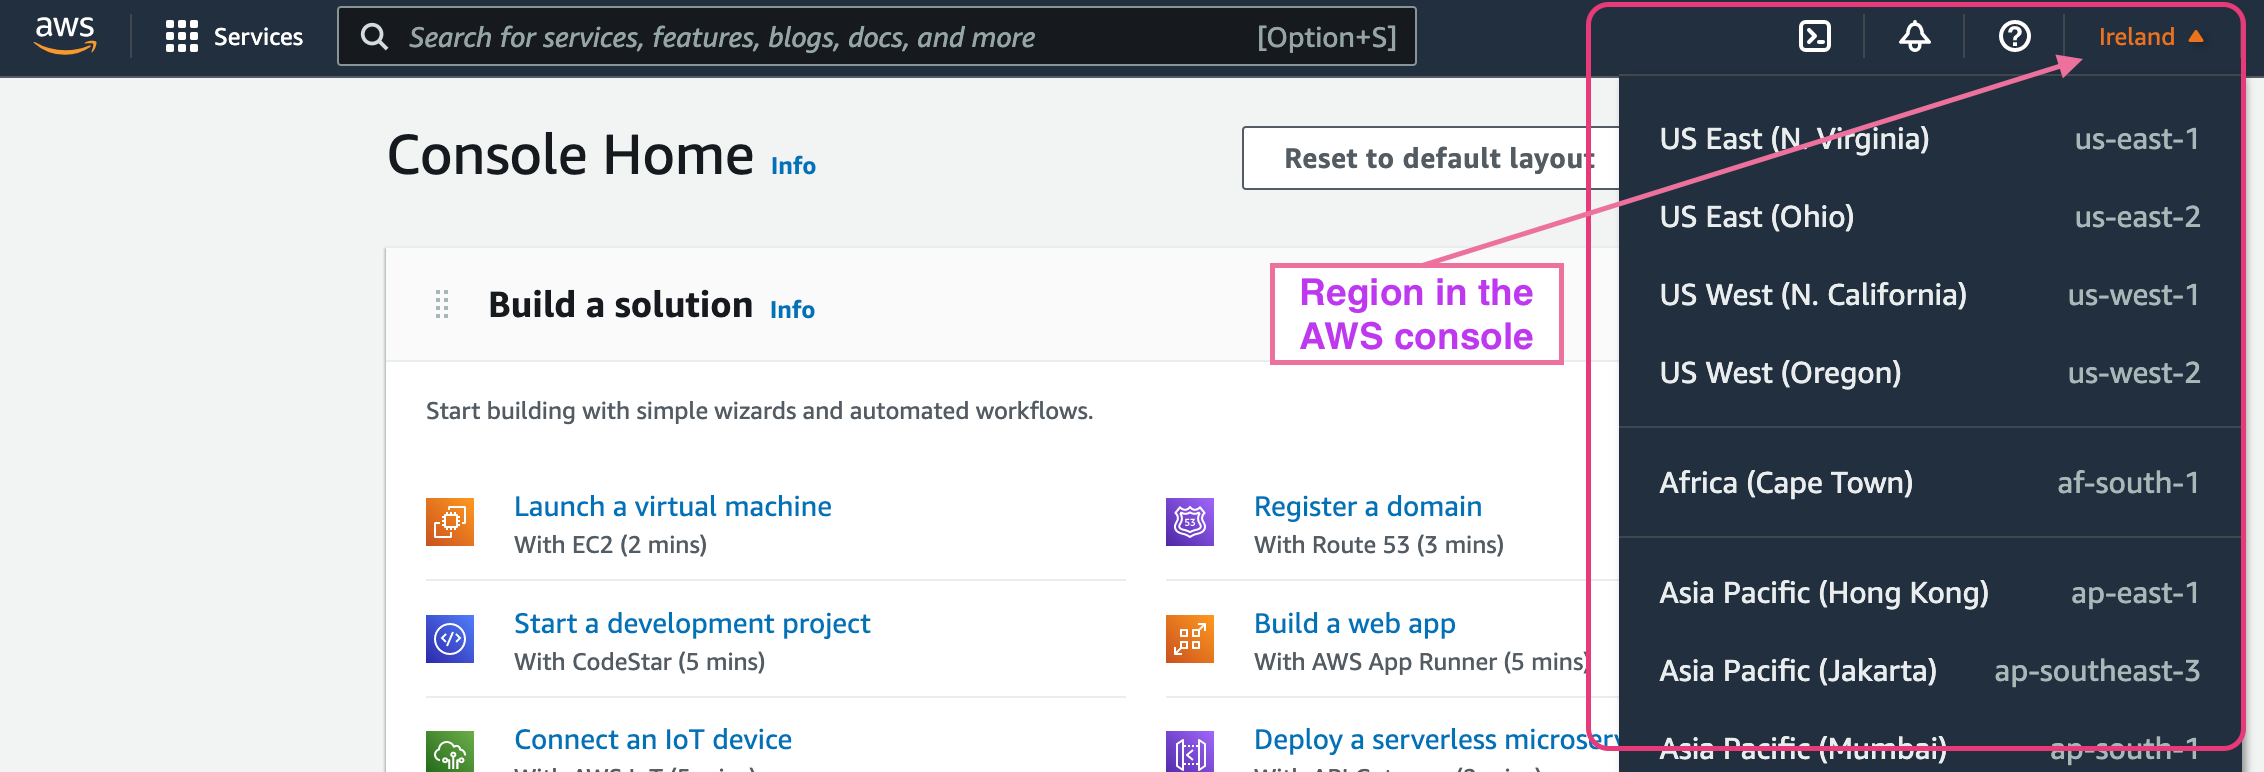 available regions displaying in the AWS console